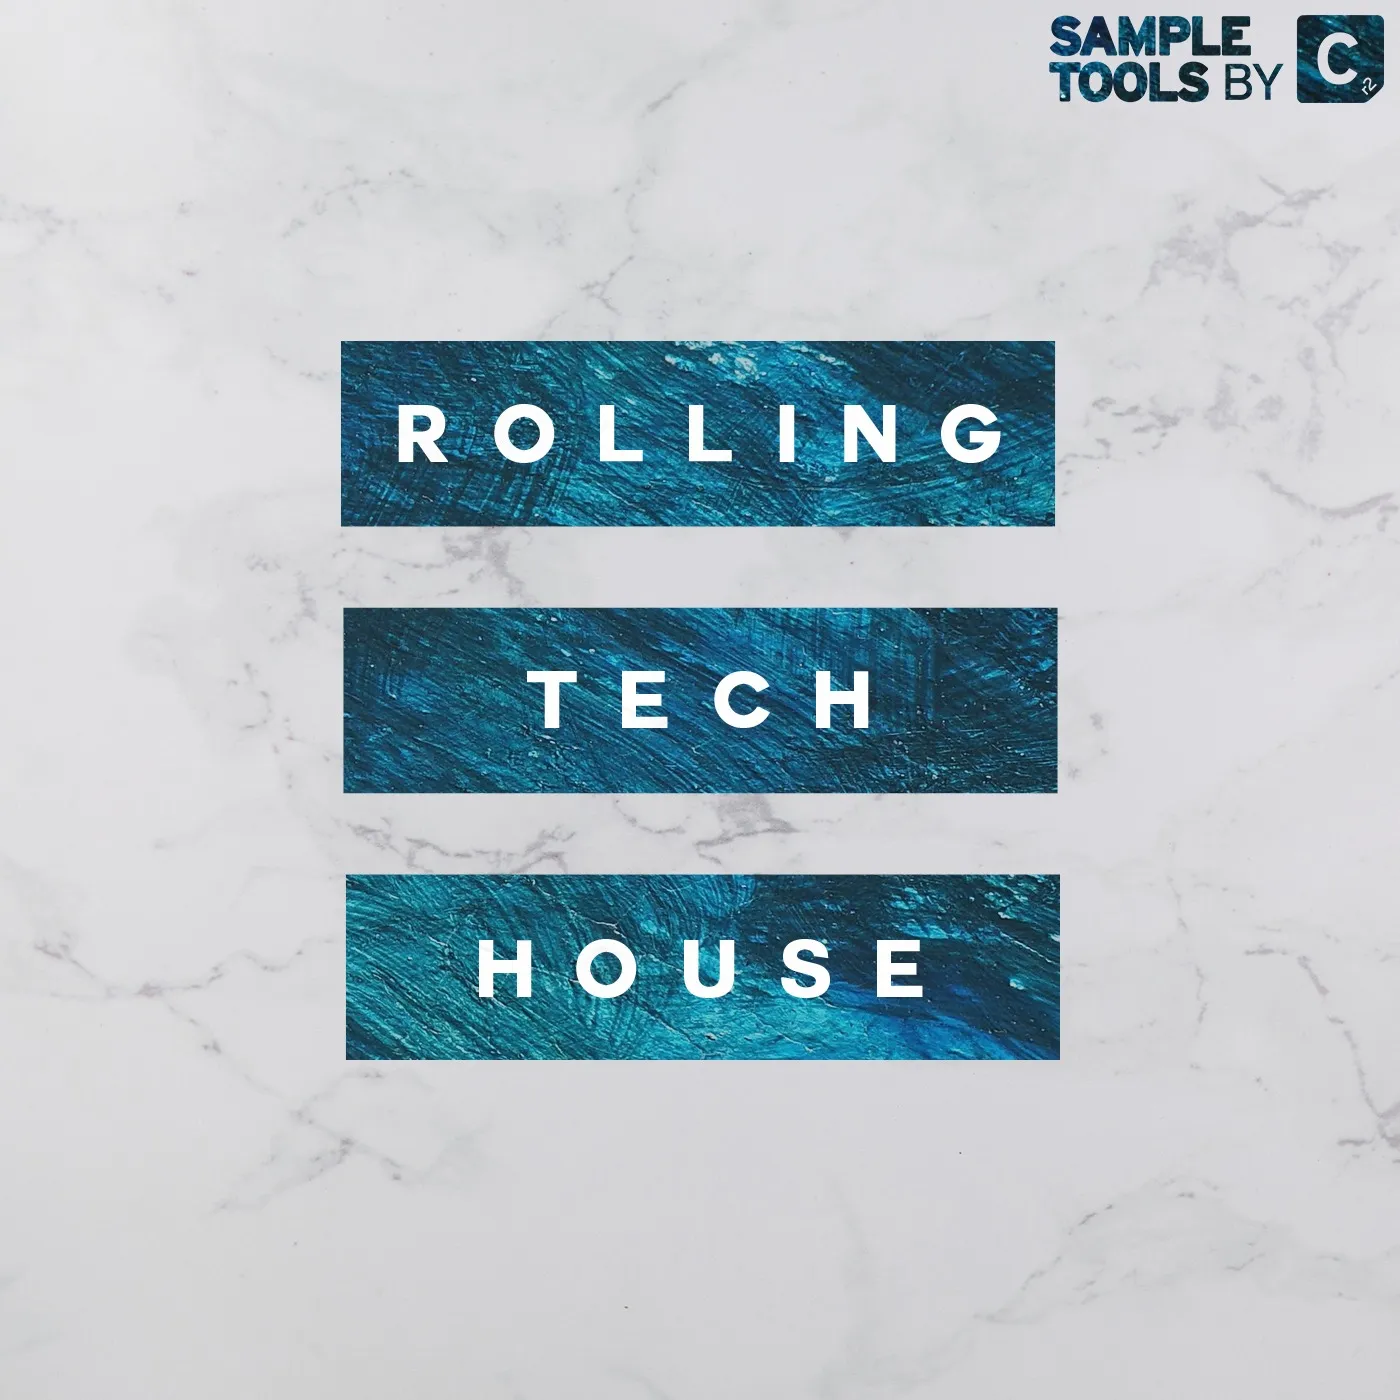 Sample Tools by cr2 - acid House and Rave. Rolling Technologies. Sampling tools